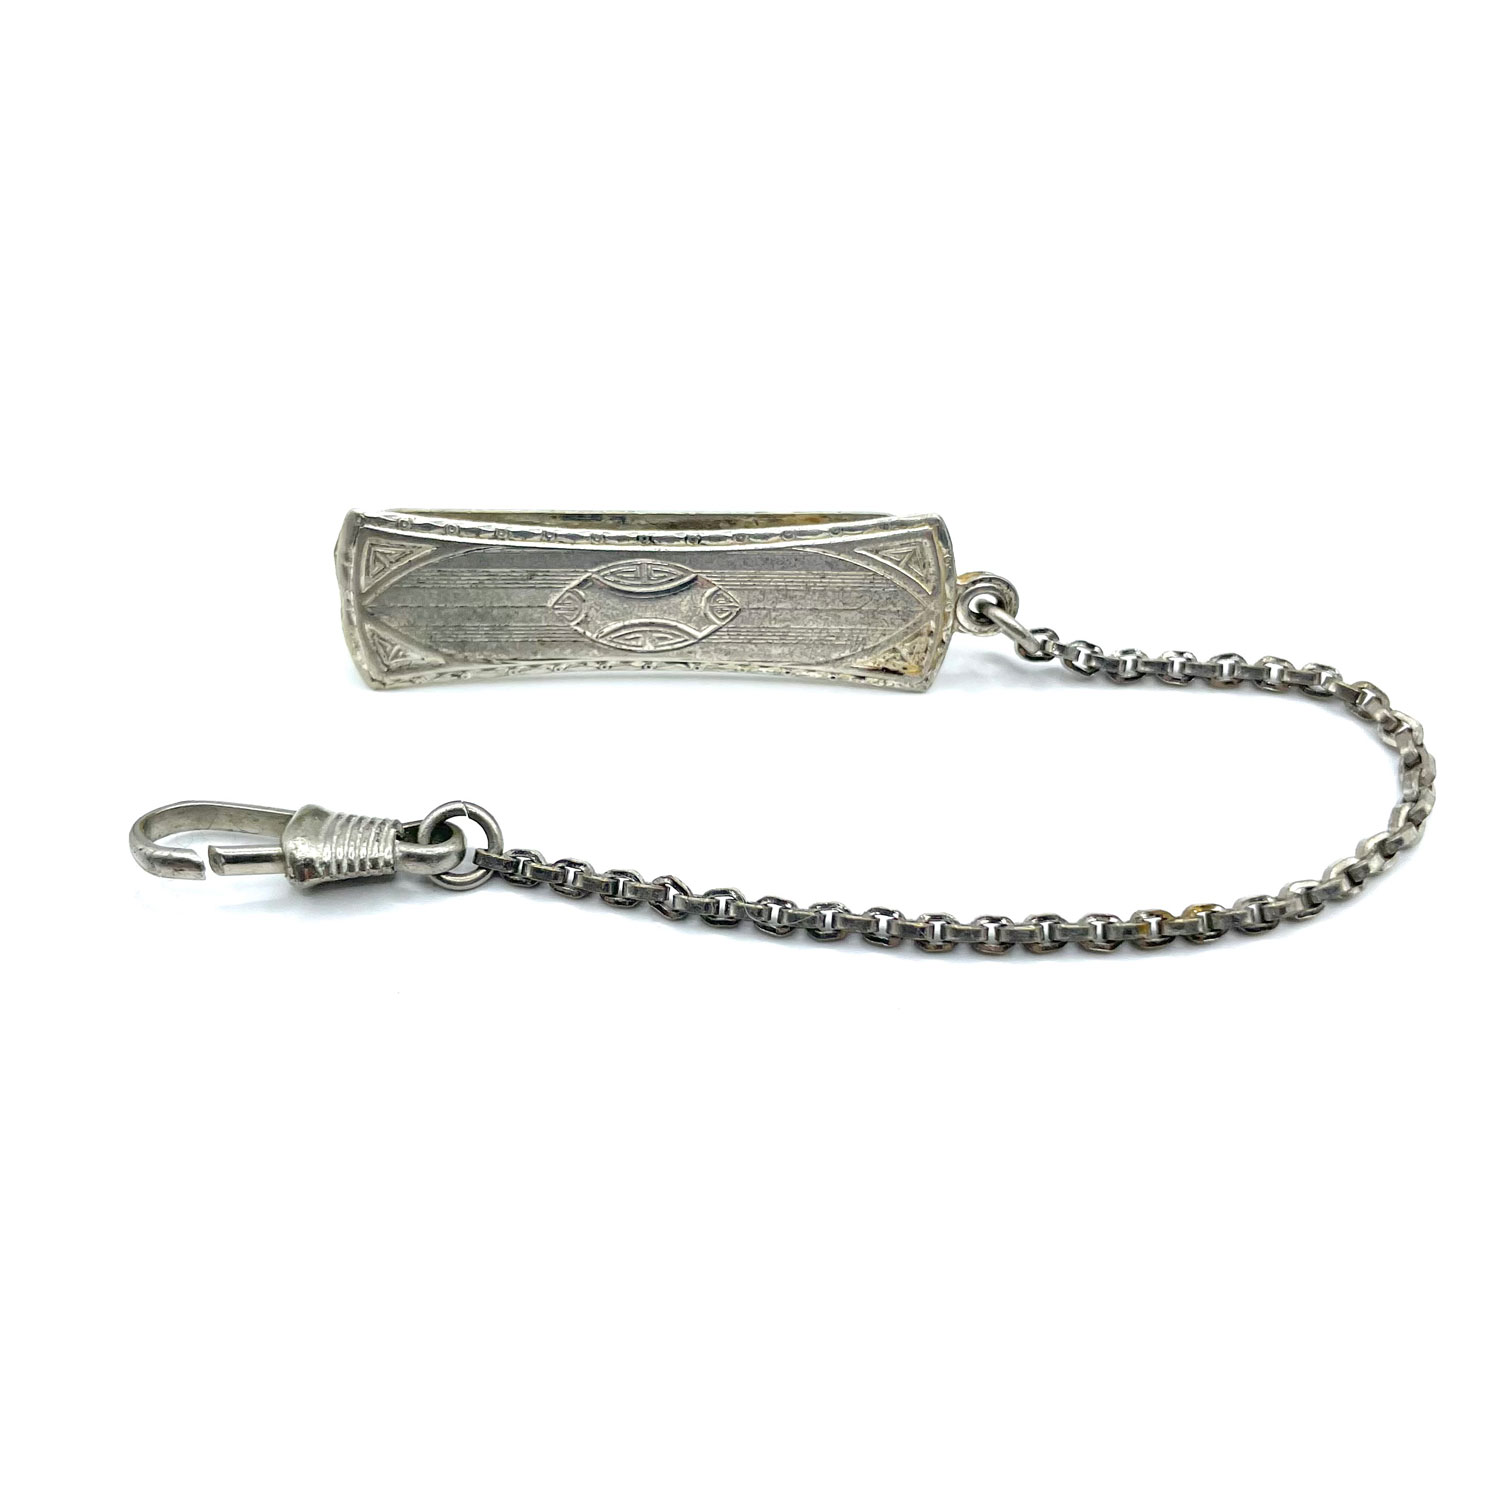 Antique watch chain and fob